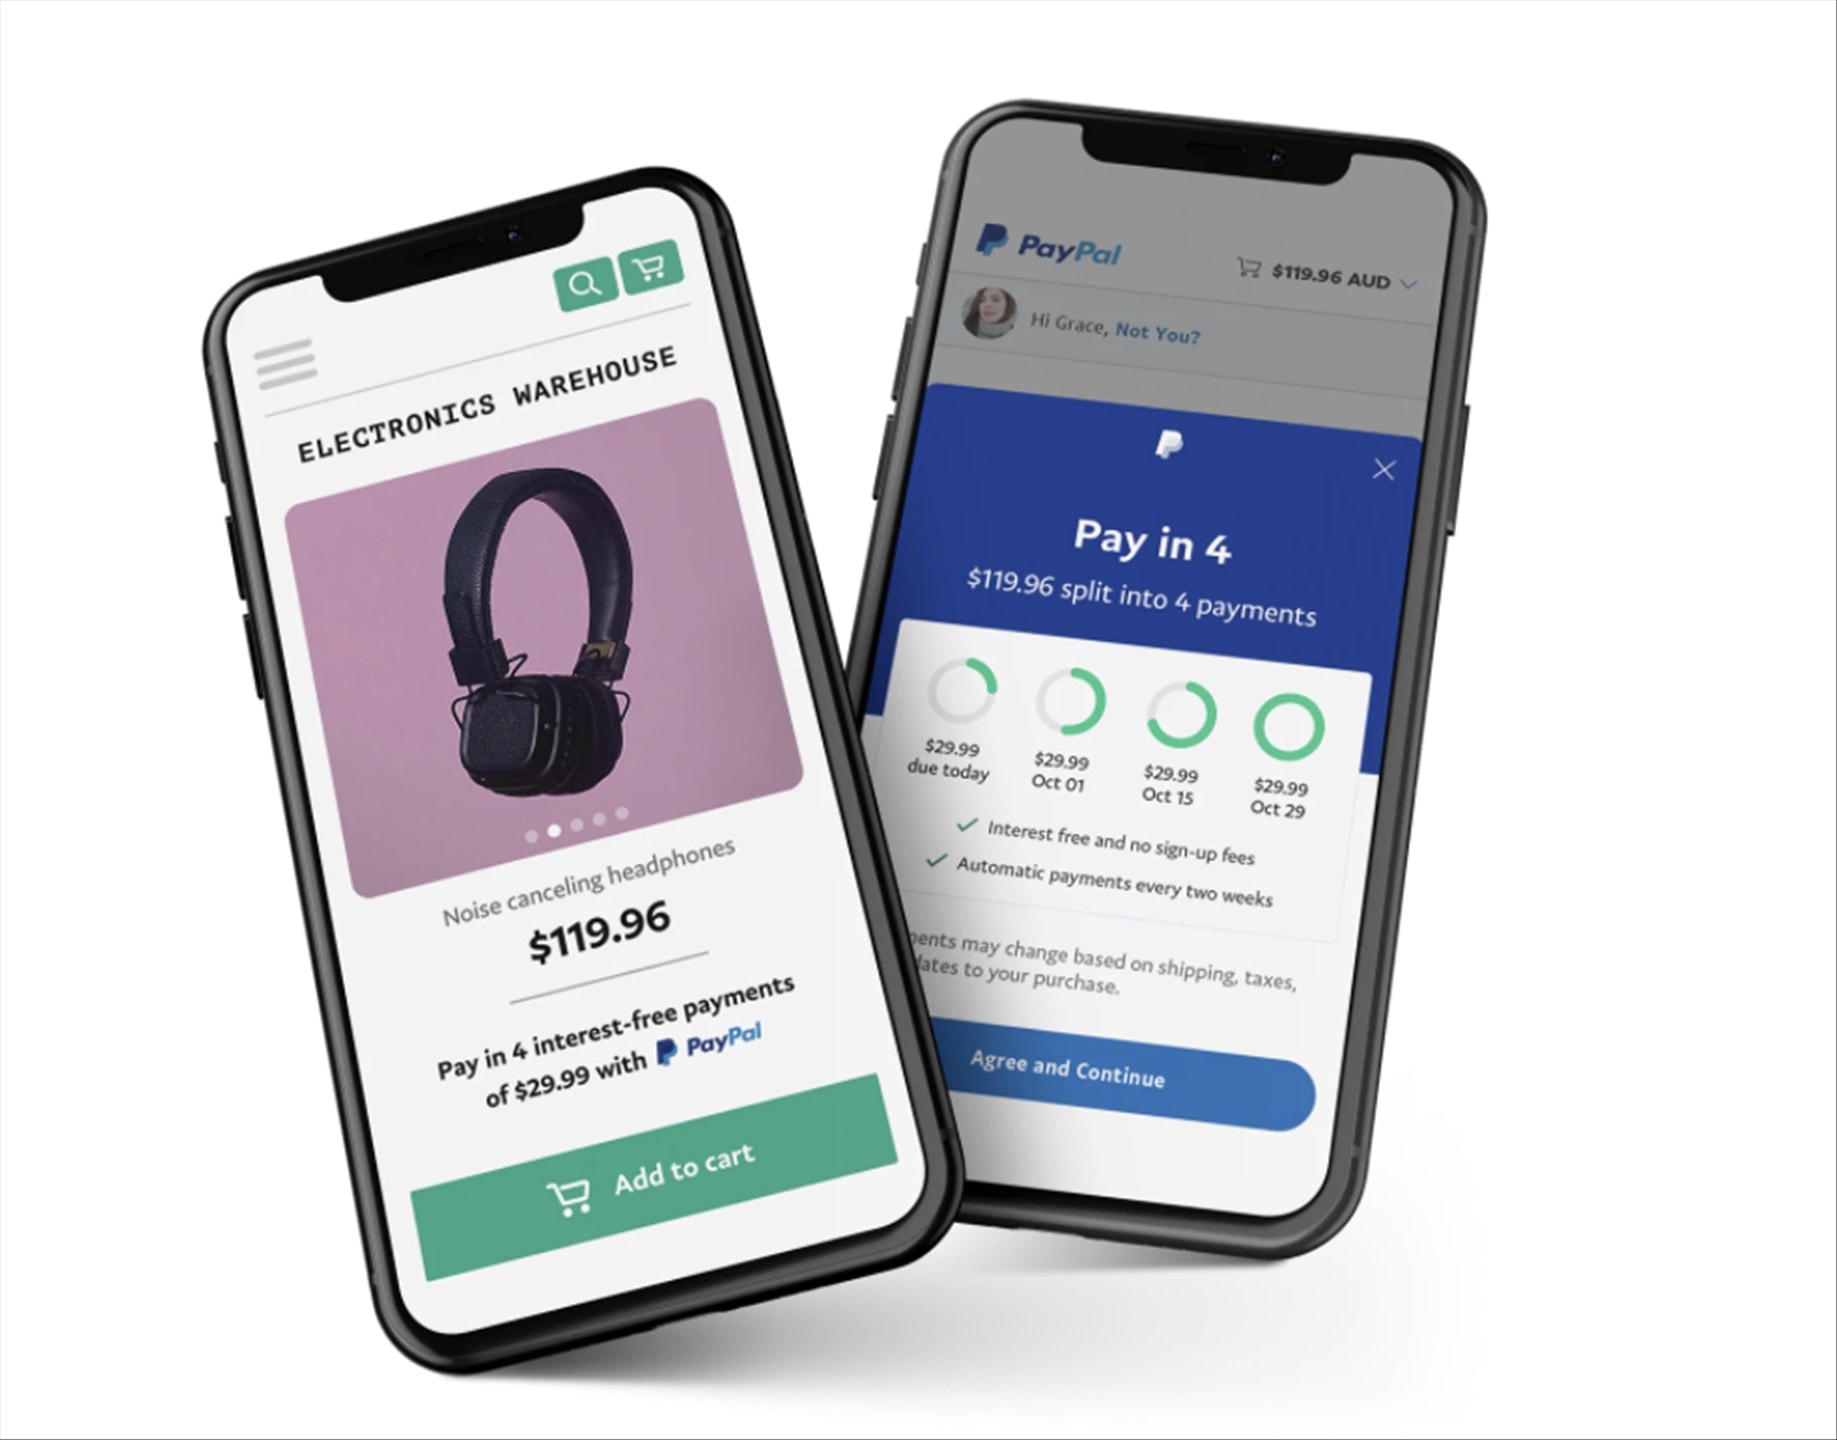 Paypal Australia announces “Buy Now Pay Later” program to go head to head with Afterpay